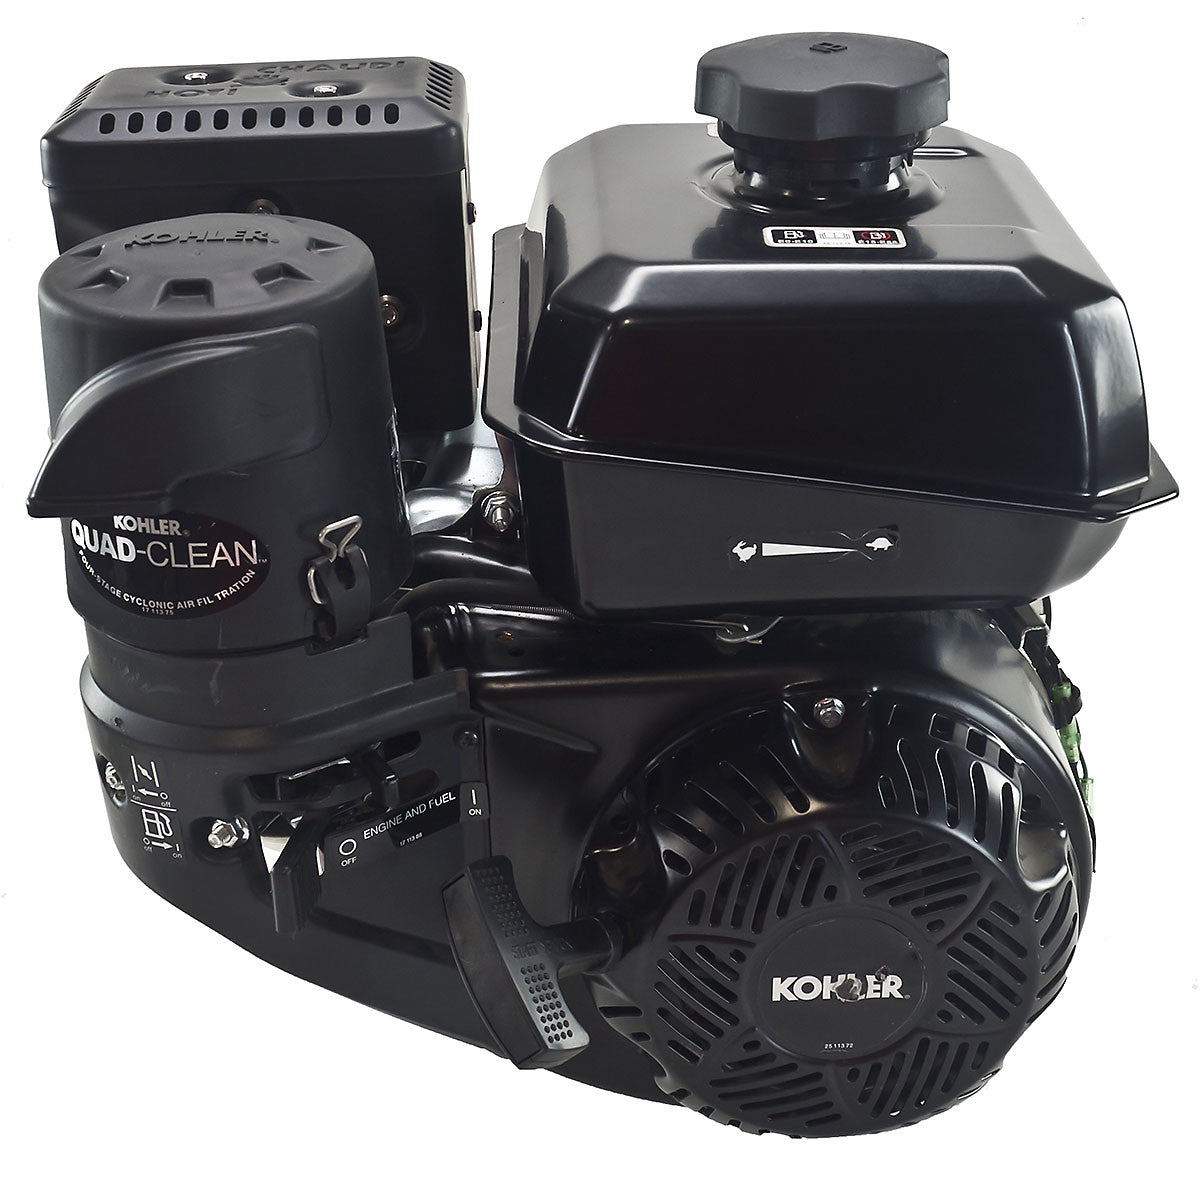 Kohler Command Pro 7HP Replacement Engine #CH270-3177